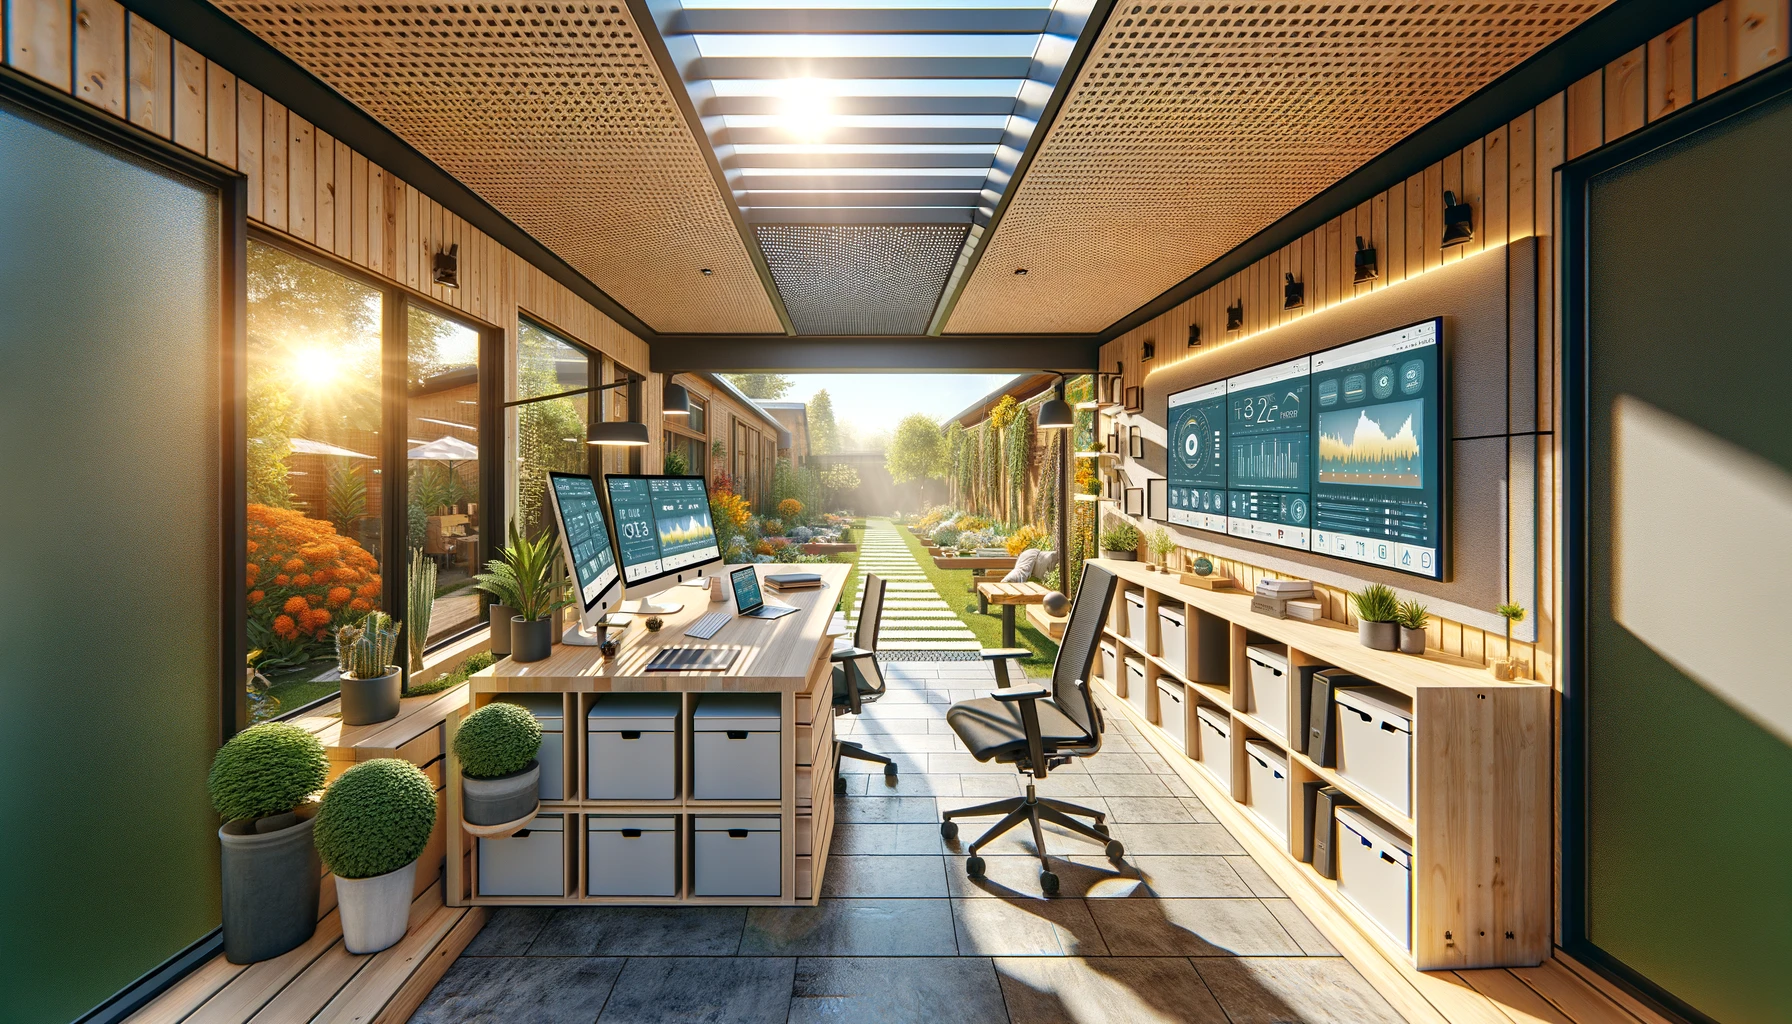 Sunny eco-friendly home office with garden view.